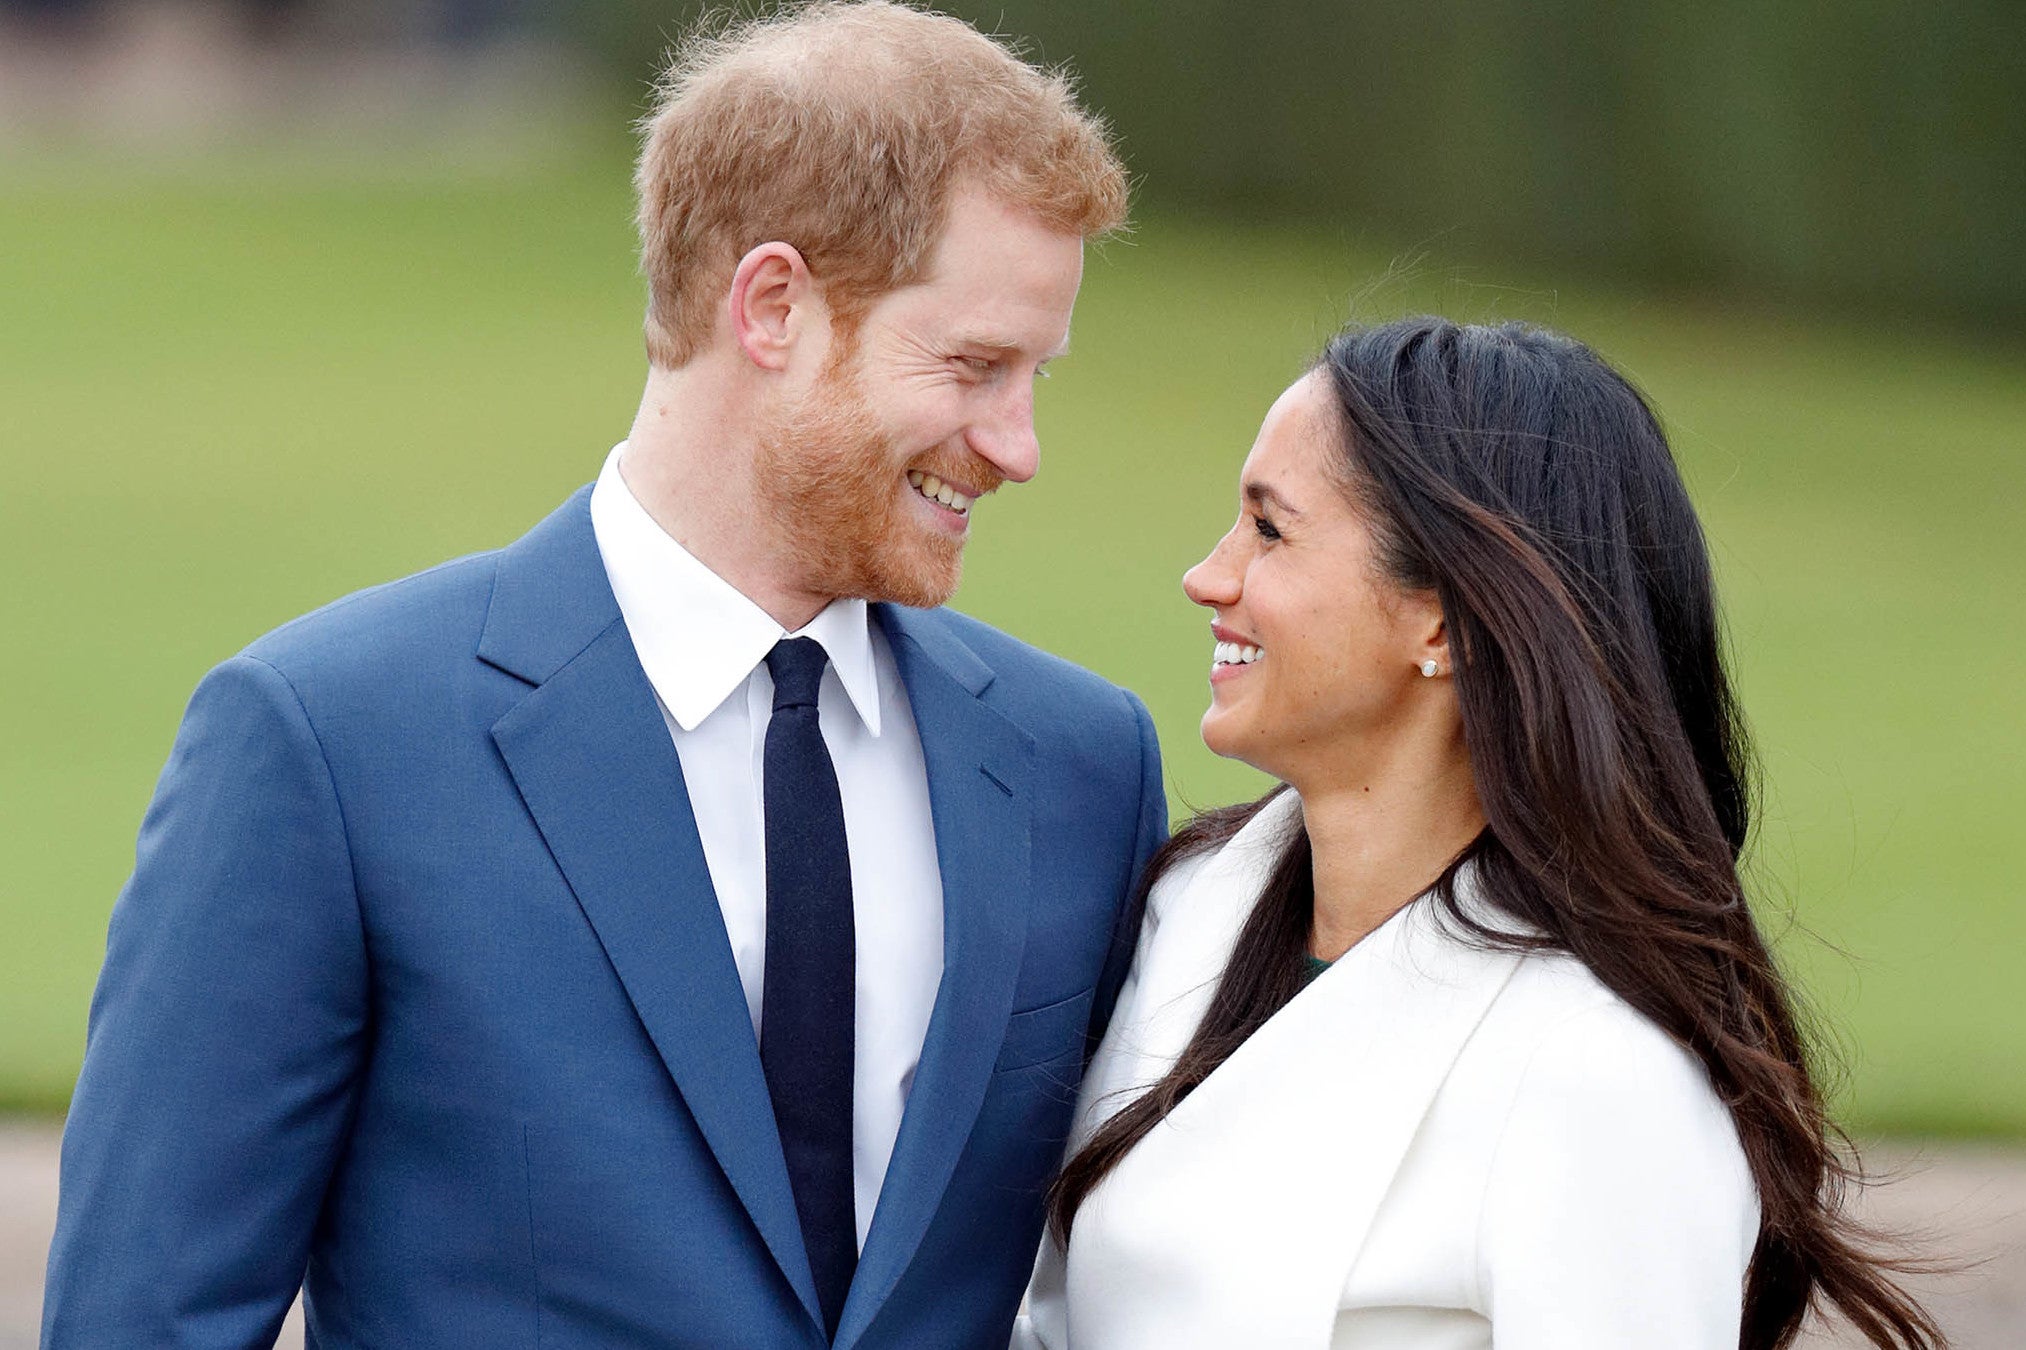 Can Harry and Meghan outdo the £527m increase in UK retail spending seen during William and Kate's royal wedding in 2011?